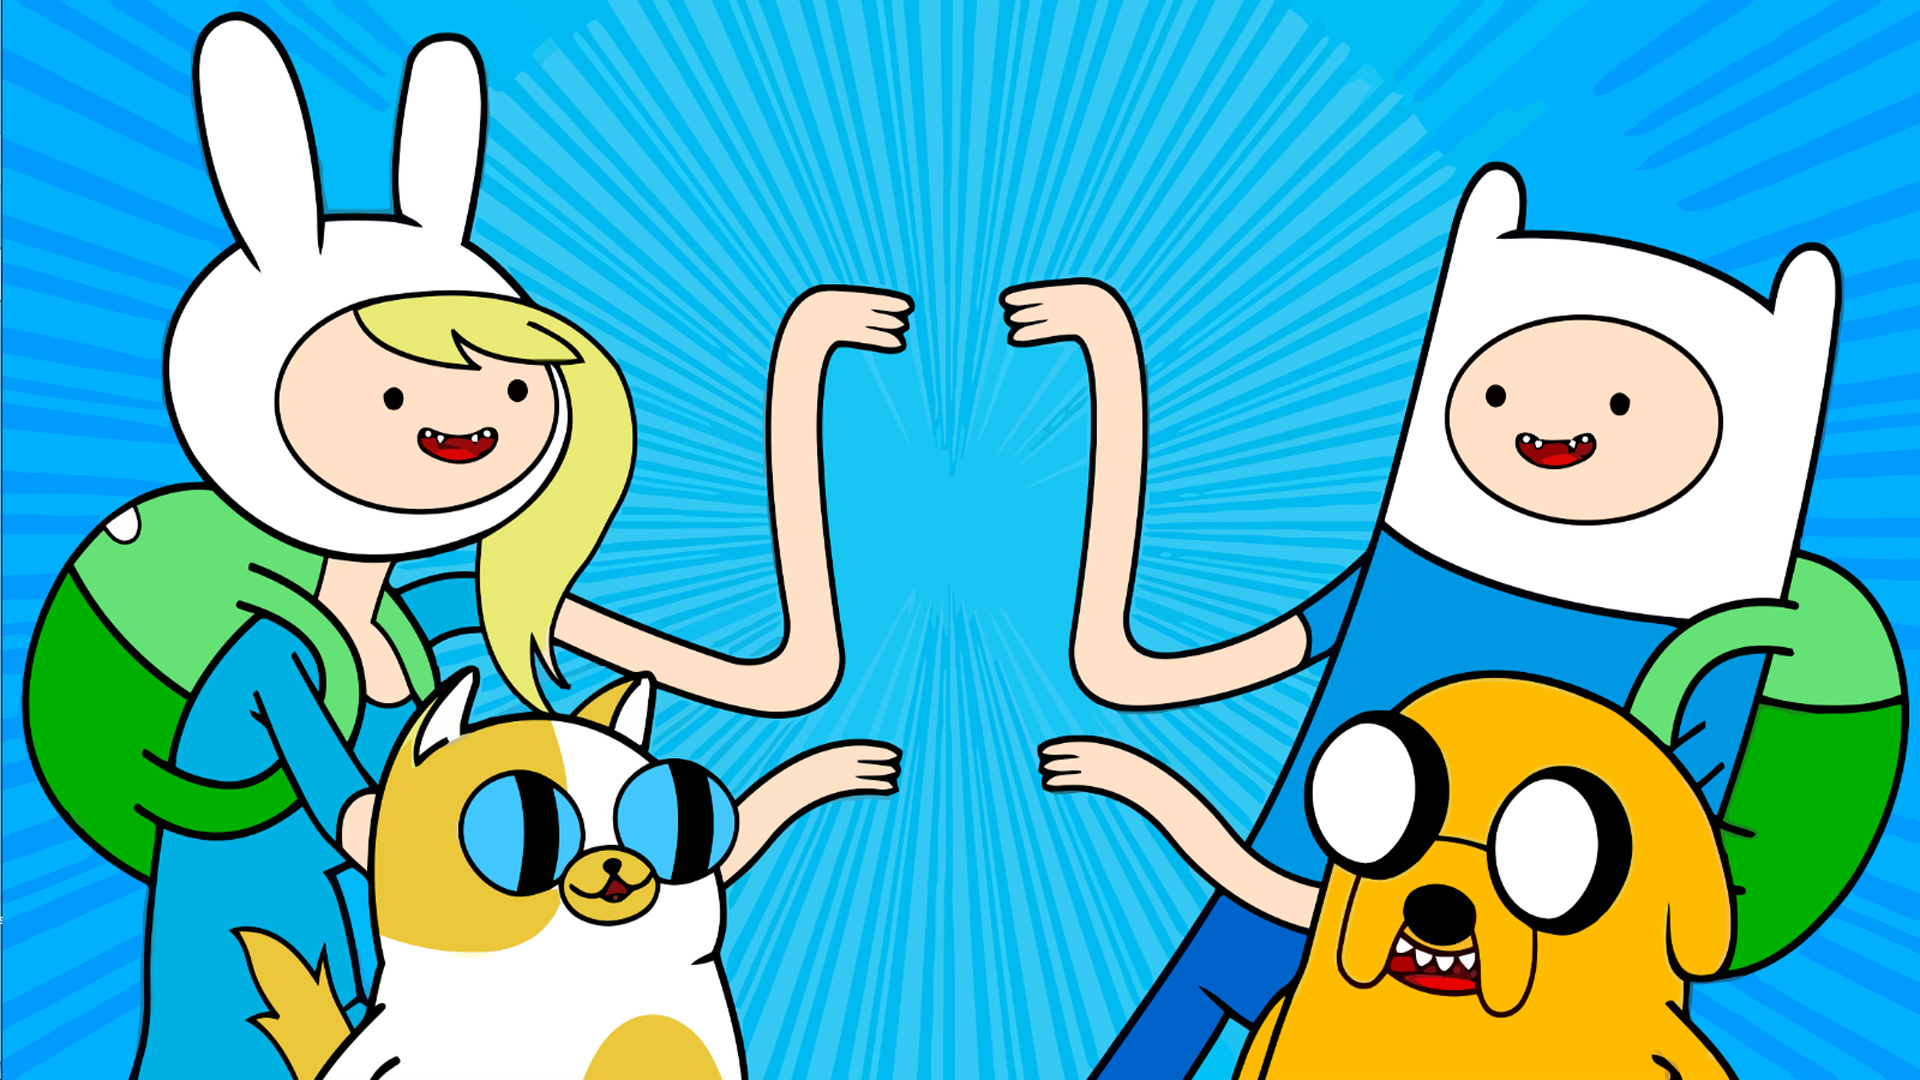 Adventure Time, Adventure Time with Finn and Jake, Adventure Time with Fionna and Cake - desktop wallpaper